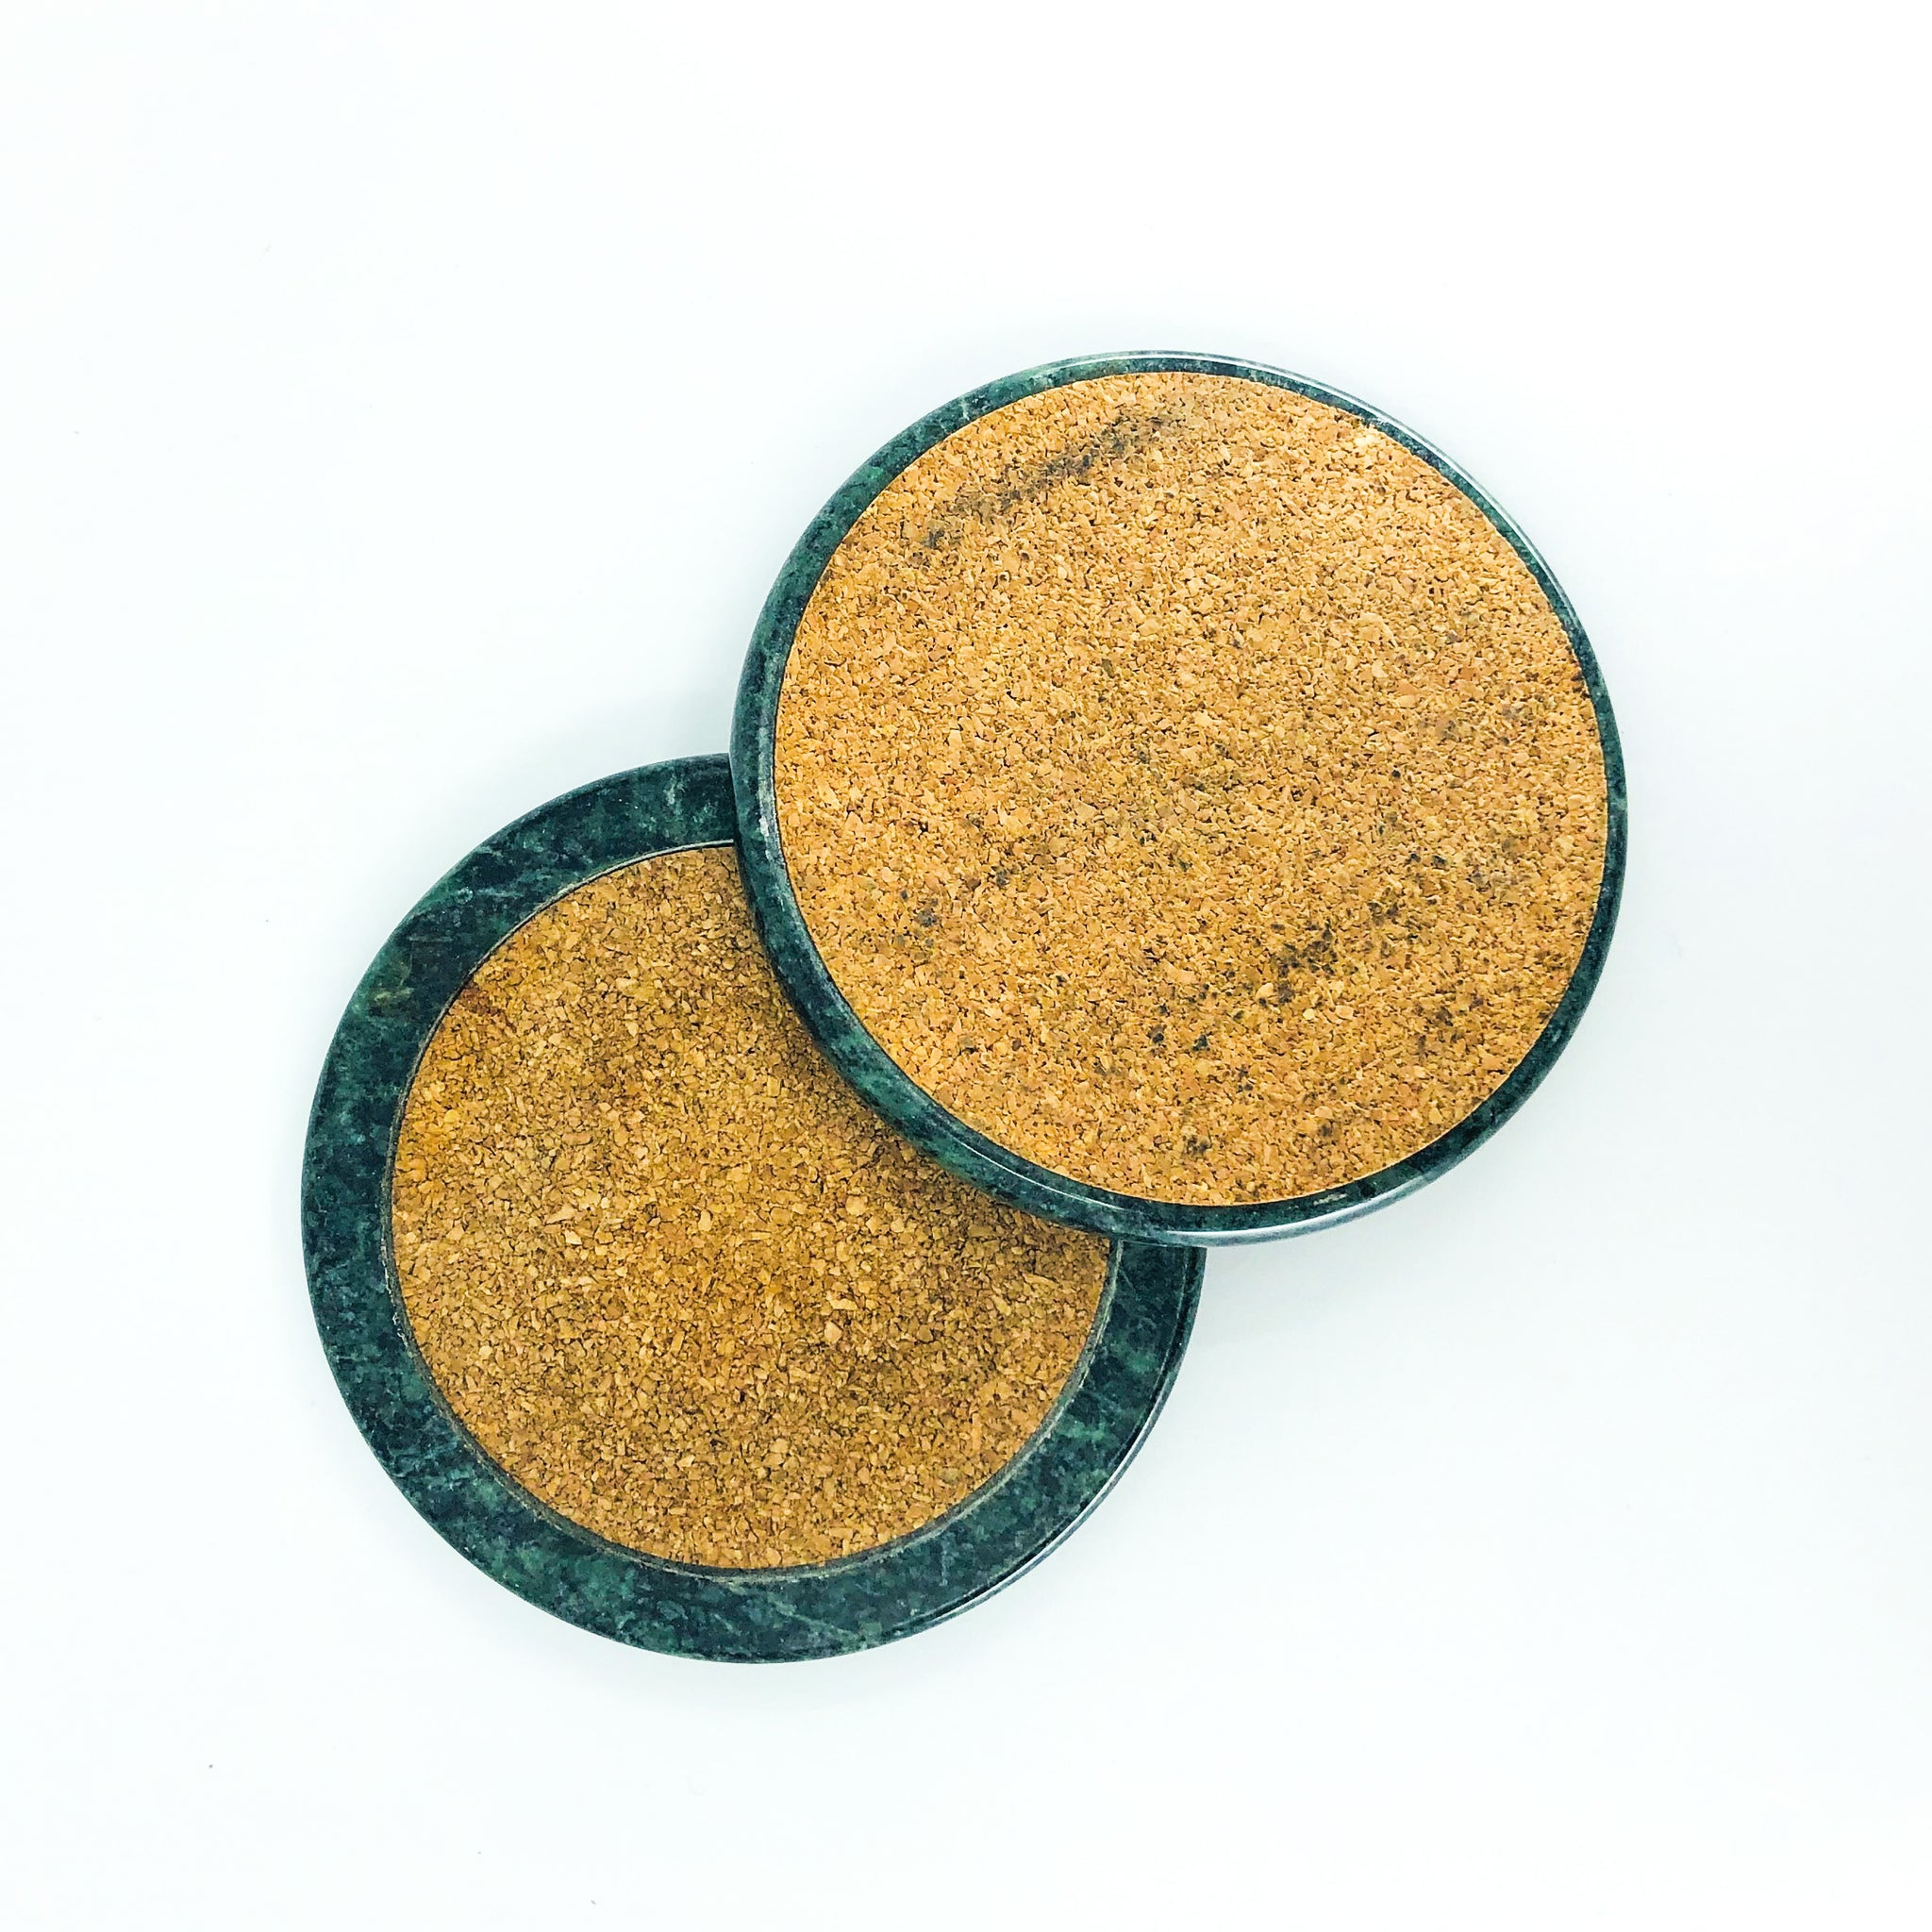 S/3 Green Marble Corked Coasters